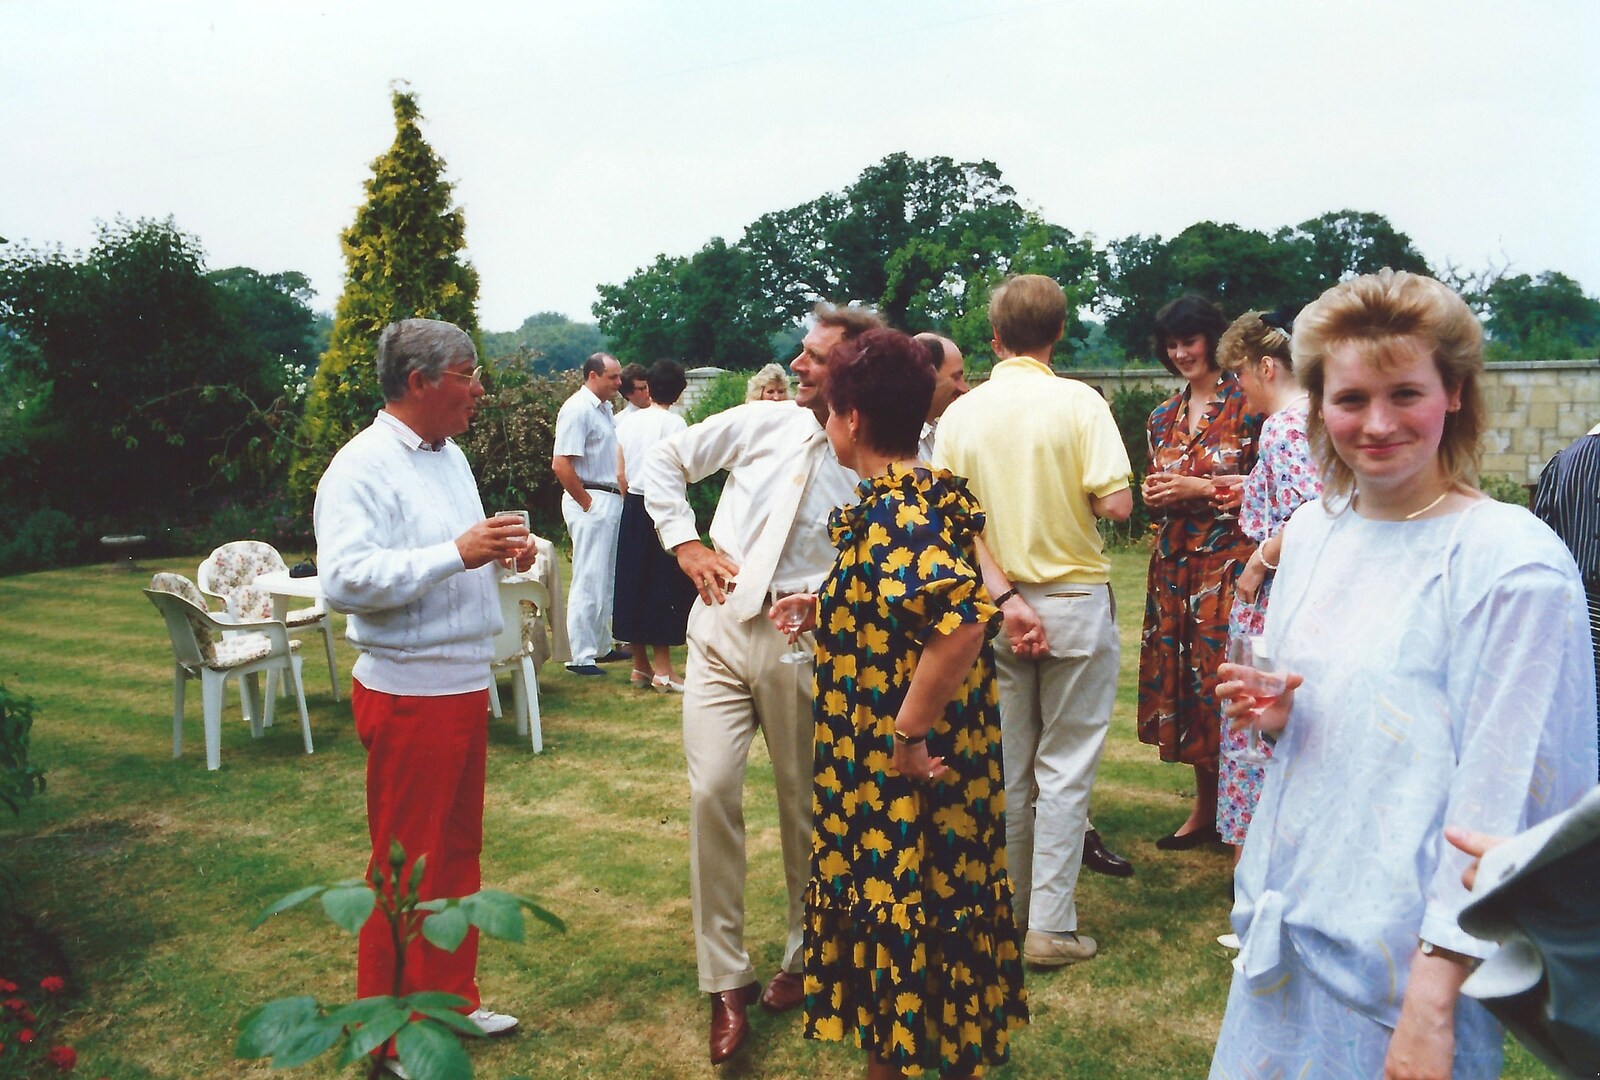 Maria looks over as guests mingle on the lawn from Mother and Mike's Wedding Reception, Bransgore, Dorset - 20th August 1988